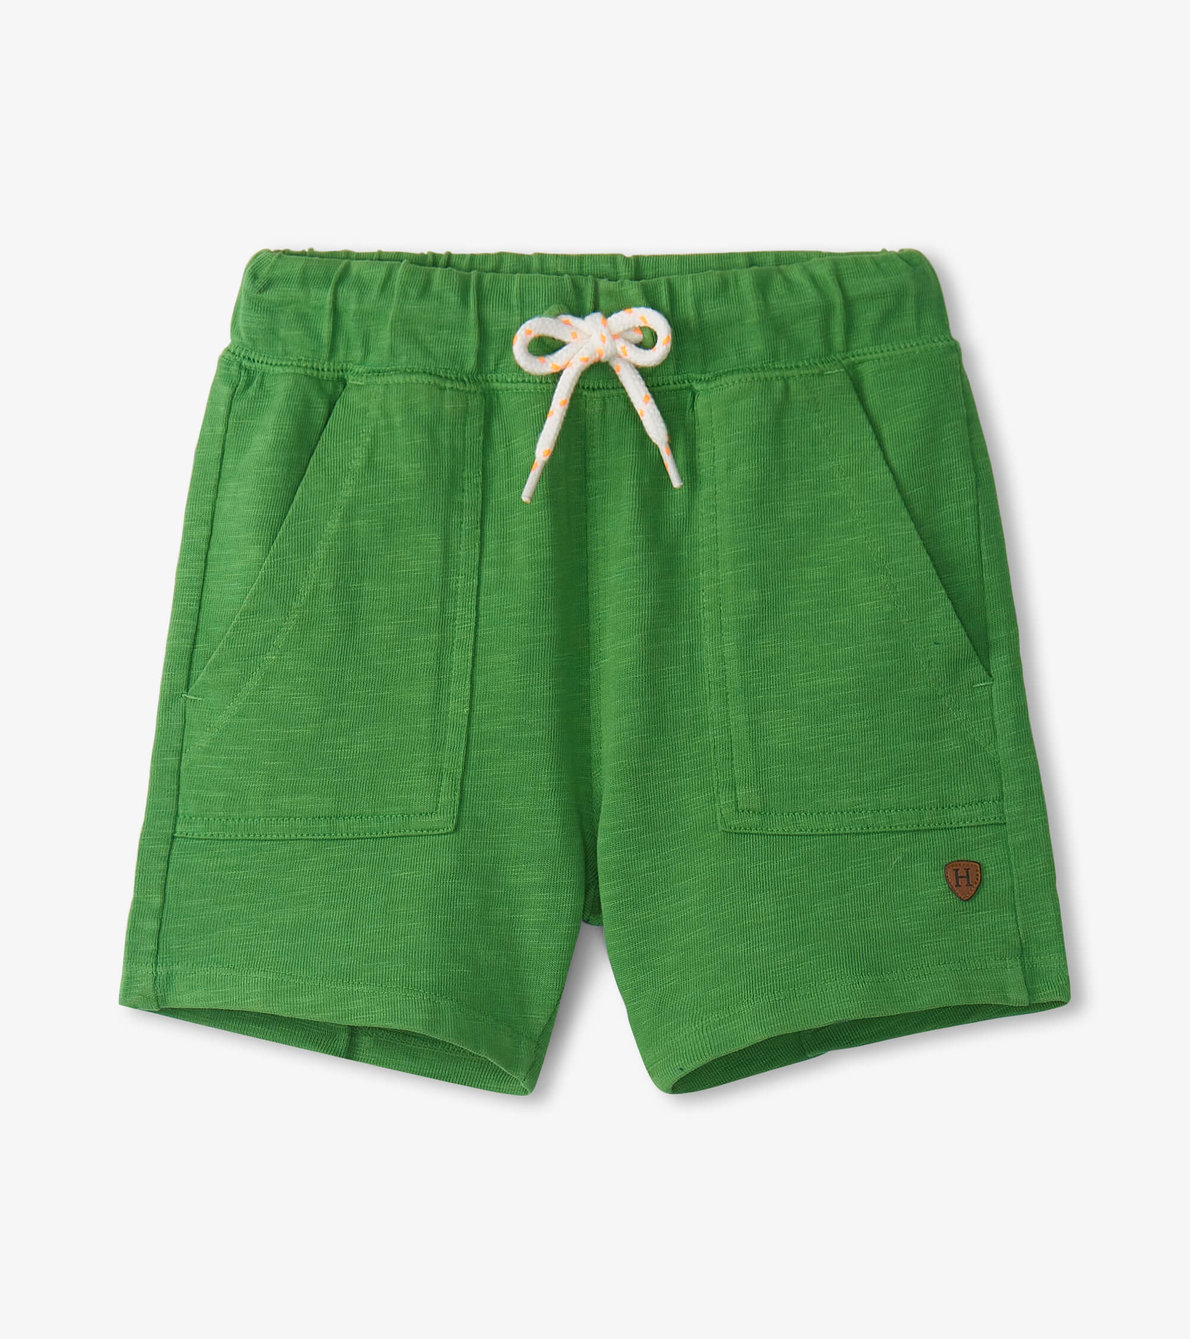 View larger image of Boys Camp Green Relaxed Shorts